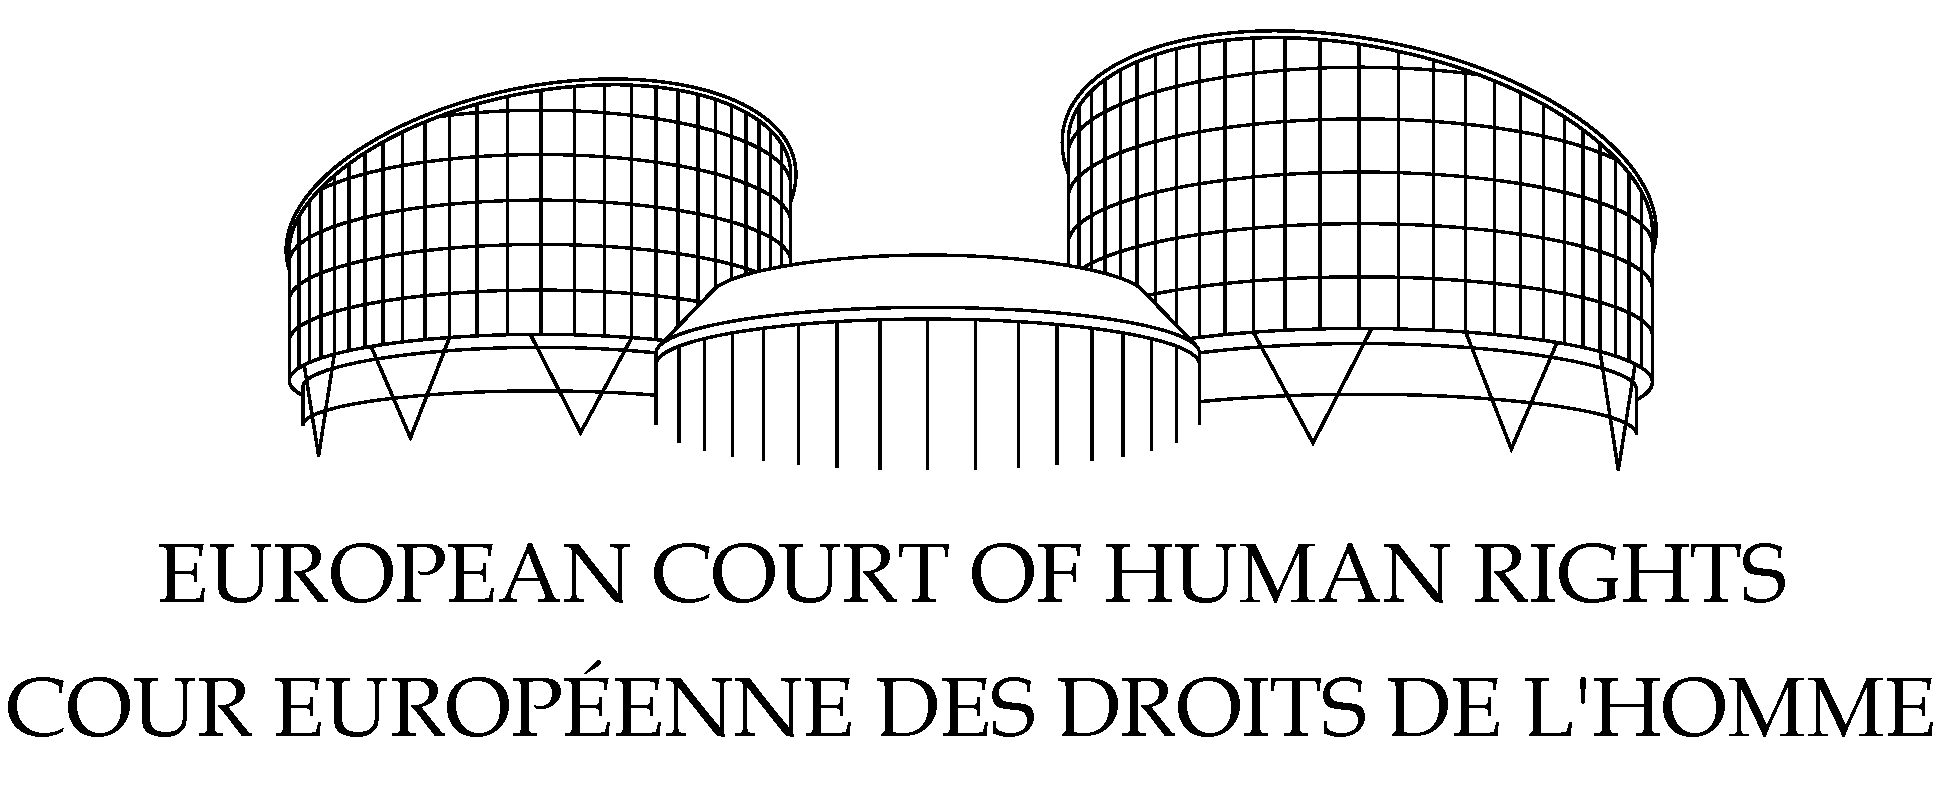 r:\1_graphics&web\court_graphic_charter\2013\echr_stationery\documents_and_letters\cover_pages_and_docs\white_600_dpi\echr_coverpagecs61_echr_coverpage_header_black.png